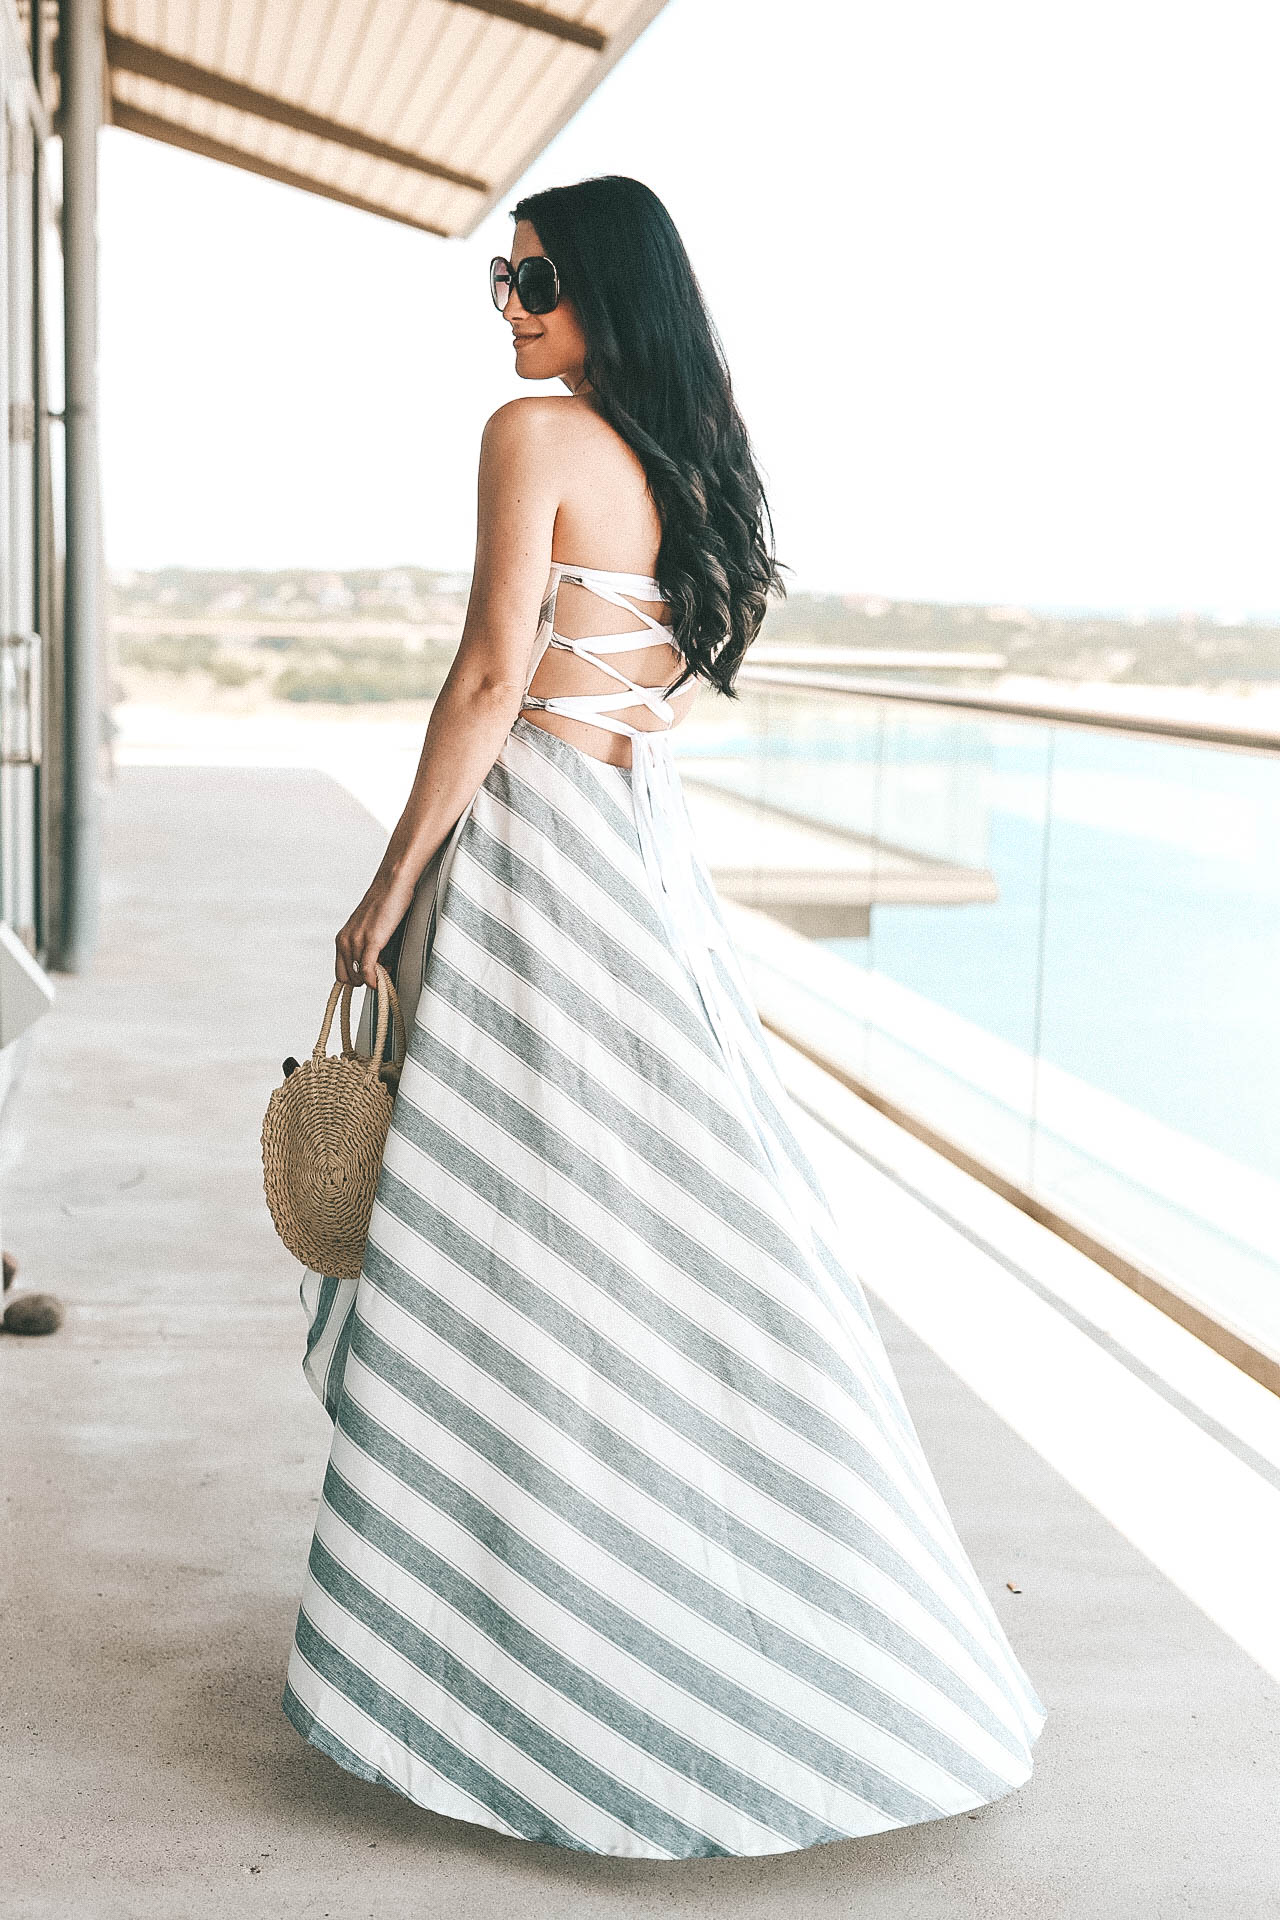 DTKAustin shares an affordable lace up maxi dress perfect for summer. Dress is AKIRA, bag is Clare V, shoes Steve Madden. | summer dresses for women | summer style | summer fashion | summer outfits for women | how to style a lace up dress || Dressed to Kill #fashion #style #womensoutfit #laceupdress #summerdress #summerfashion #summerstyle #dtkaustin - {The Lace-Up Dress of Your Dreams} featured by popular Austin fashion blogger, Dressed to Kill